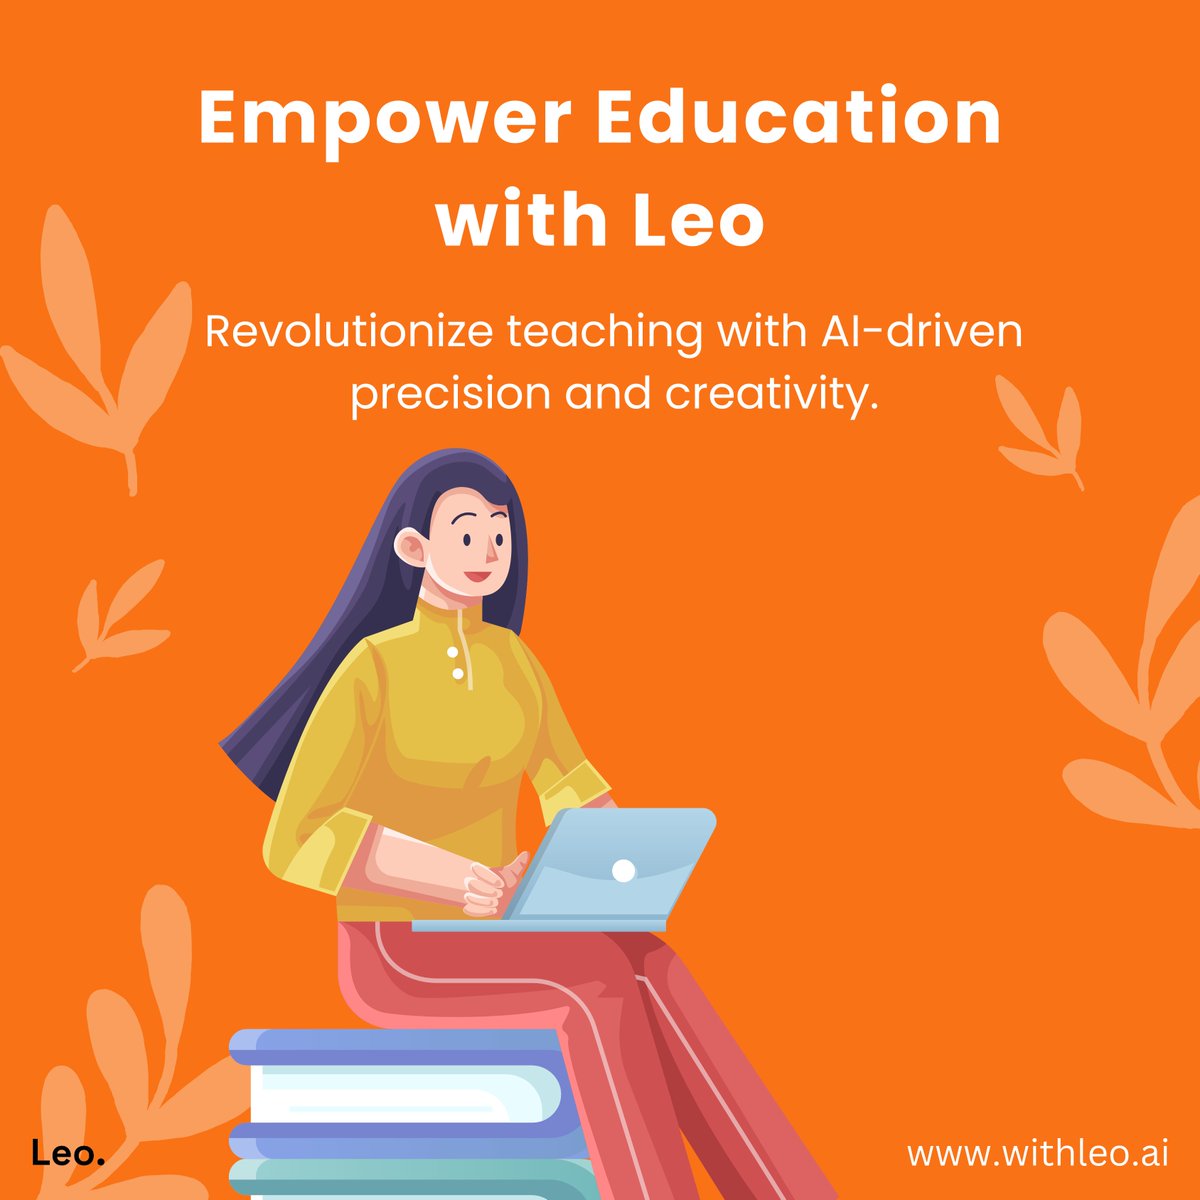 Leo revolutionizes #education with #AI-powered tools, facilitating assignment creation and grading. Explore Leo's capabilities at withleo.ai to enhance learning and save teachers time. #edtech #teaching #AIinEducation #TeacherTools #TeachingAssistants #EducationalAI